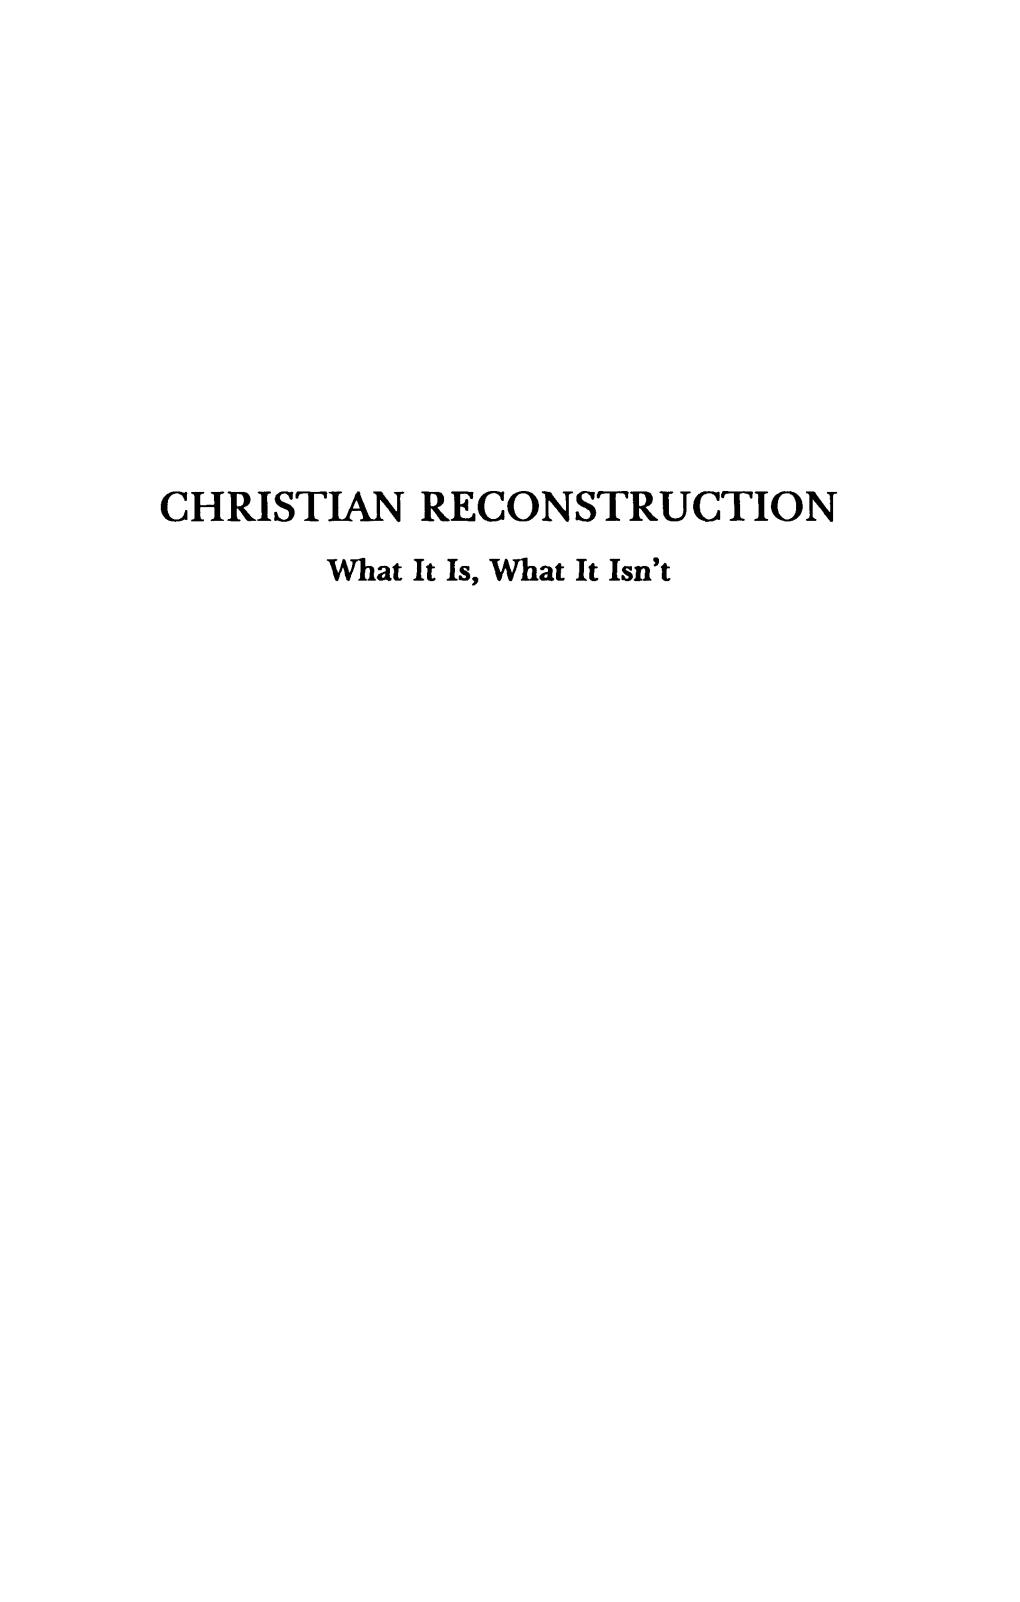 CHRISTIAN RECONSTRUCTION What It Is, What It Isn't